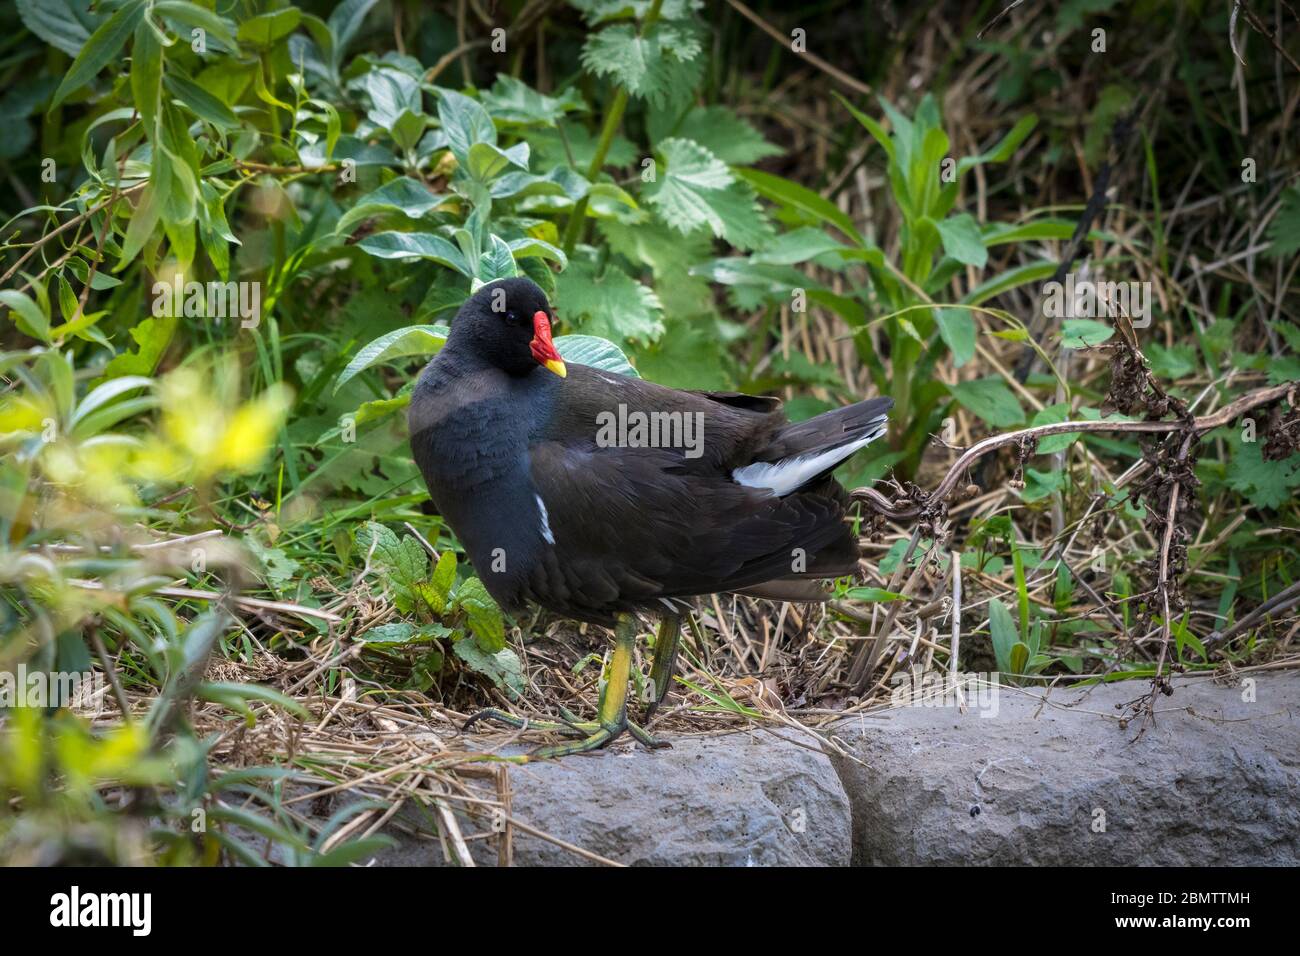 A Moorhen Gallinula chloropus in the undergrowth at Trenance Boating Lake in Trenance Gardens in Newquay in Cornwall. Stock Photo